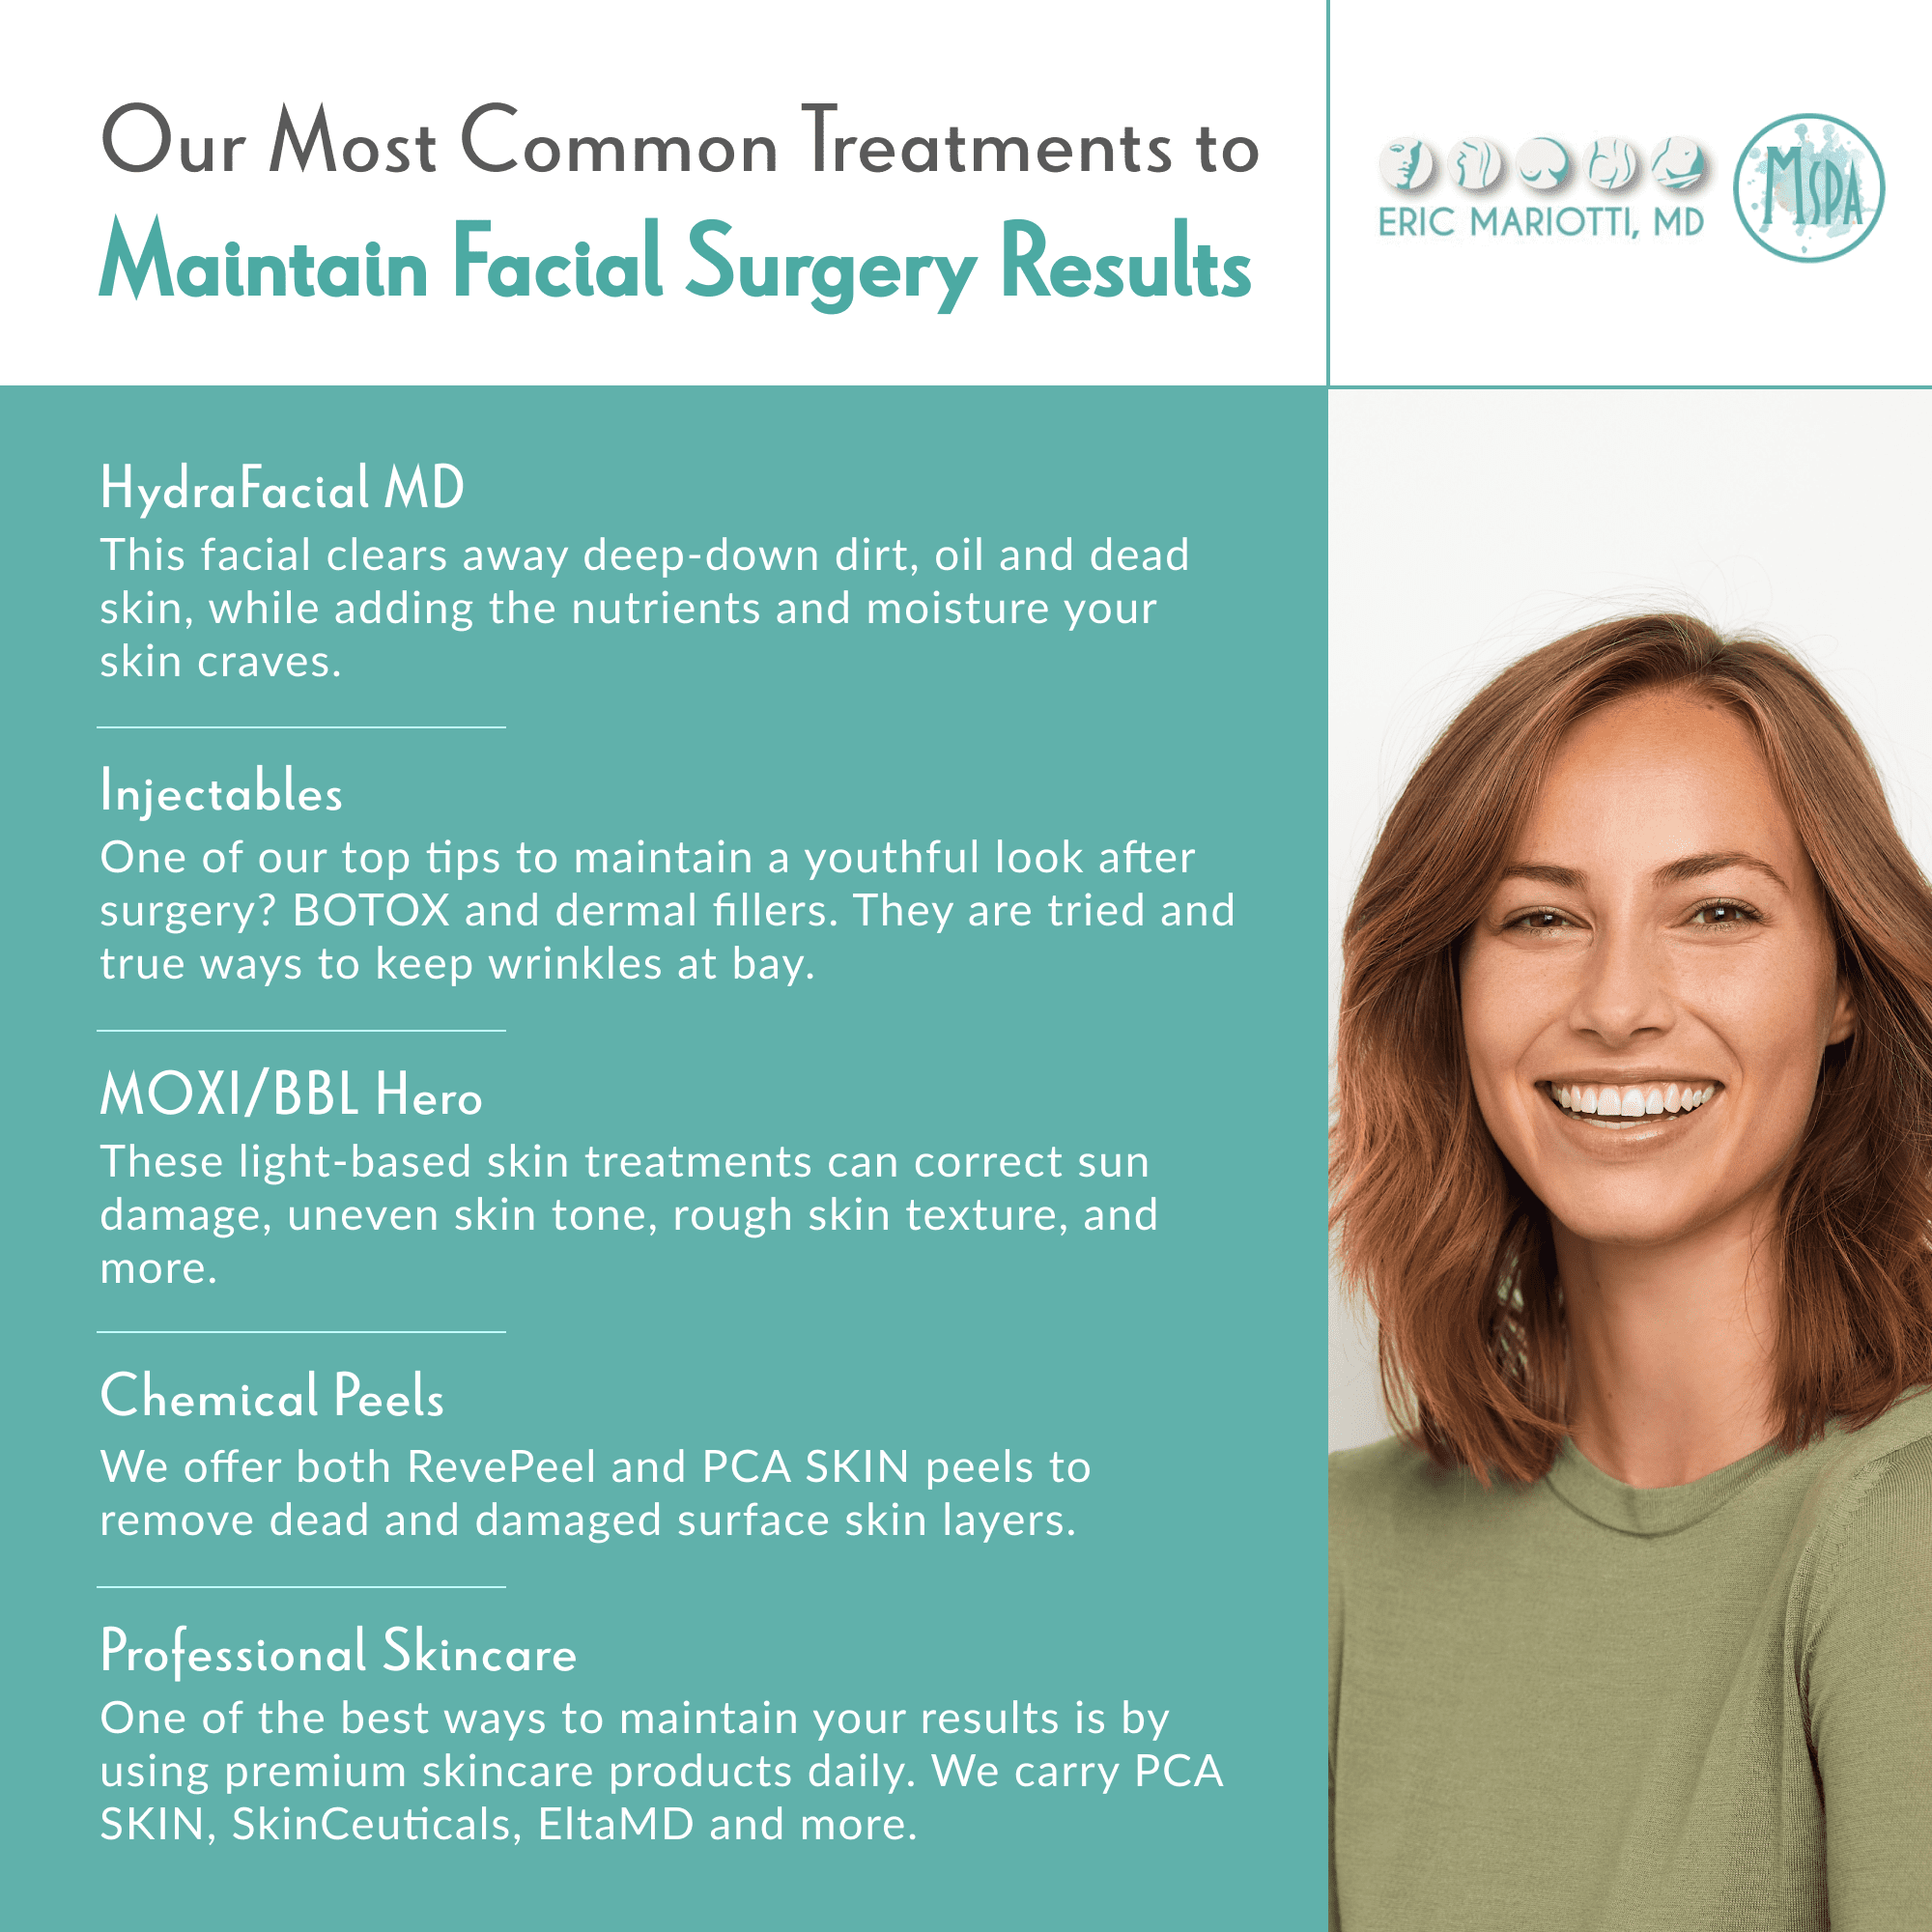 Our Most Common Treatments to Maintain Facial Surgery Results